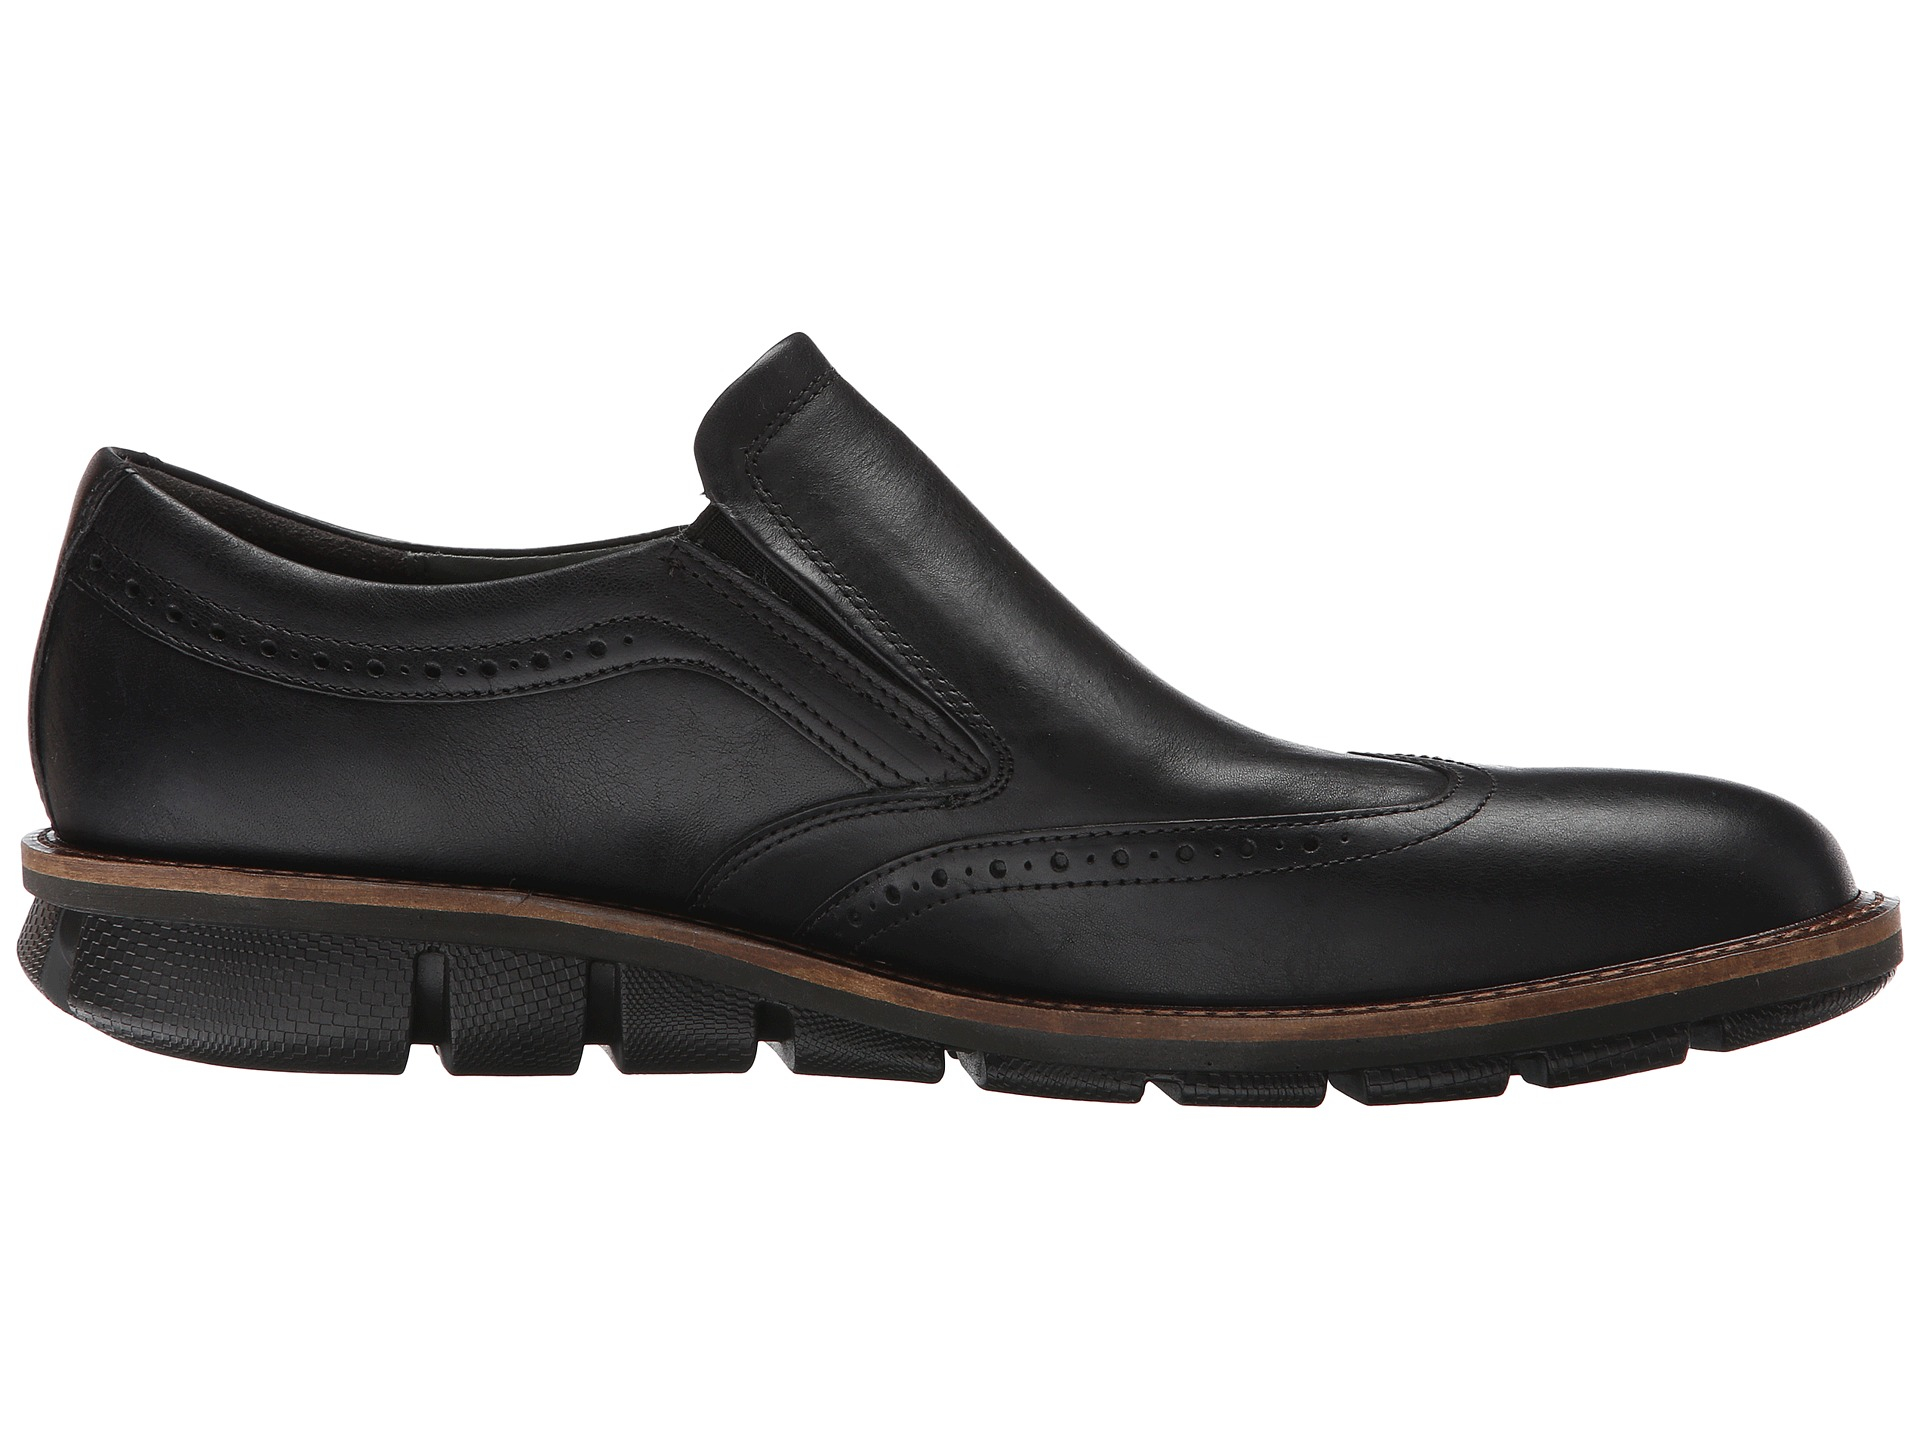 Ecco Leather Jeremy Brogue Slip-on in Black for Men - Lyst